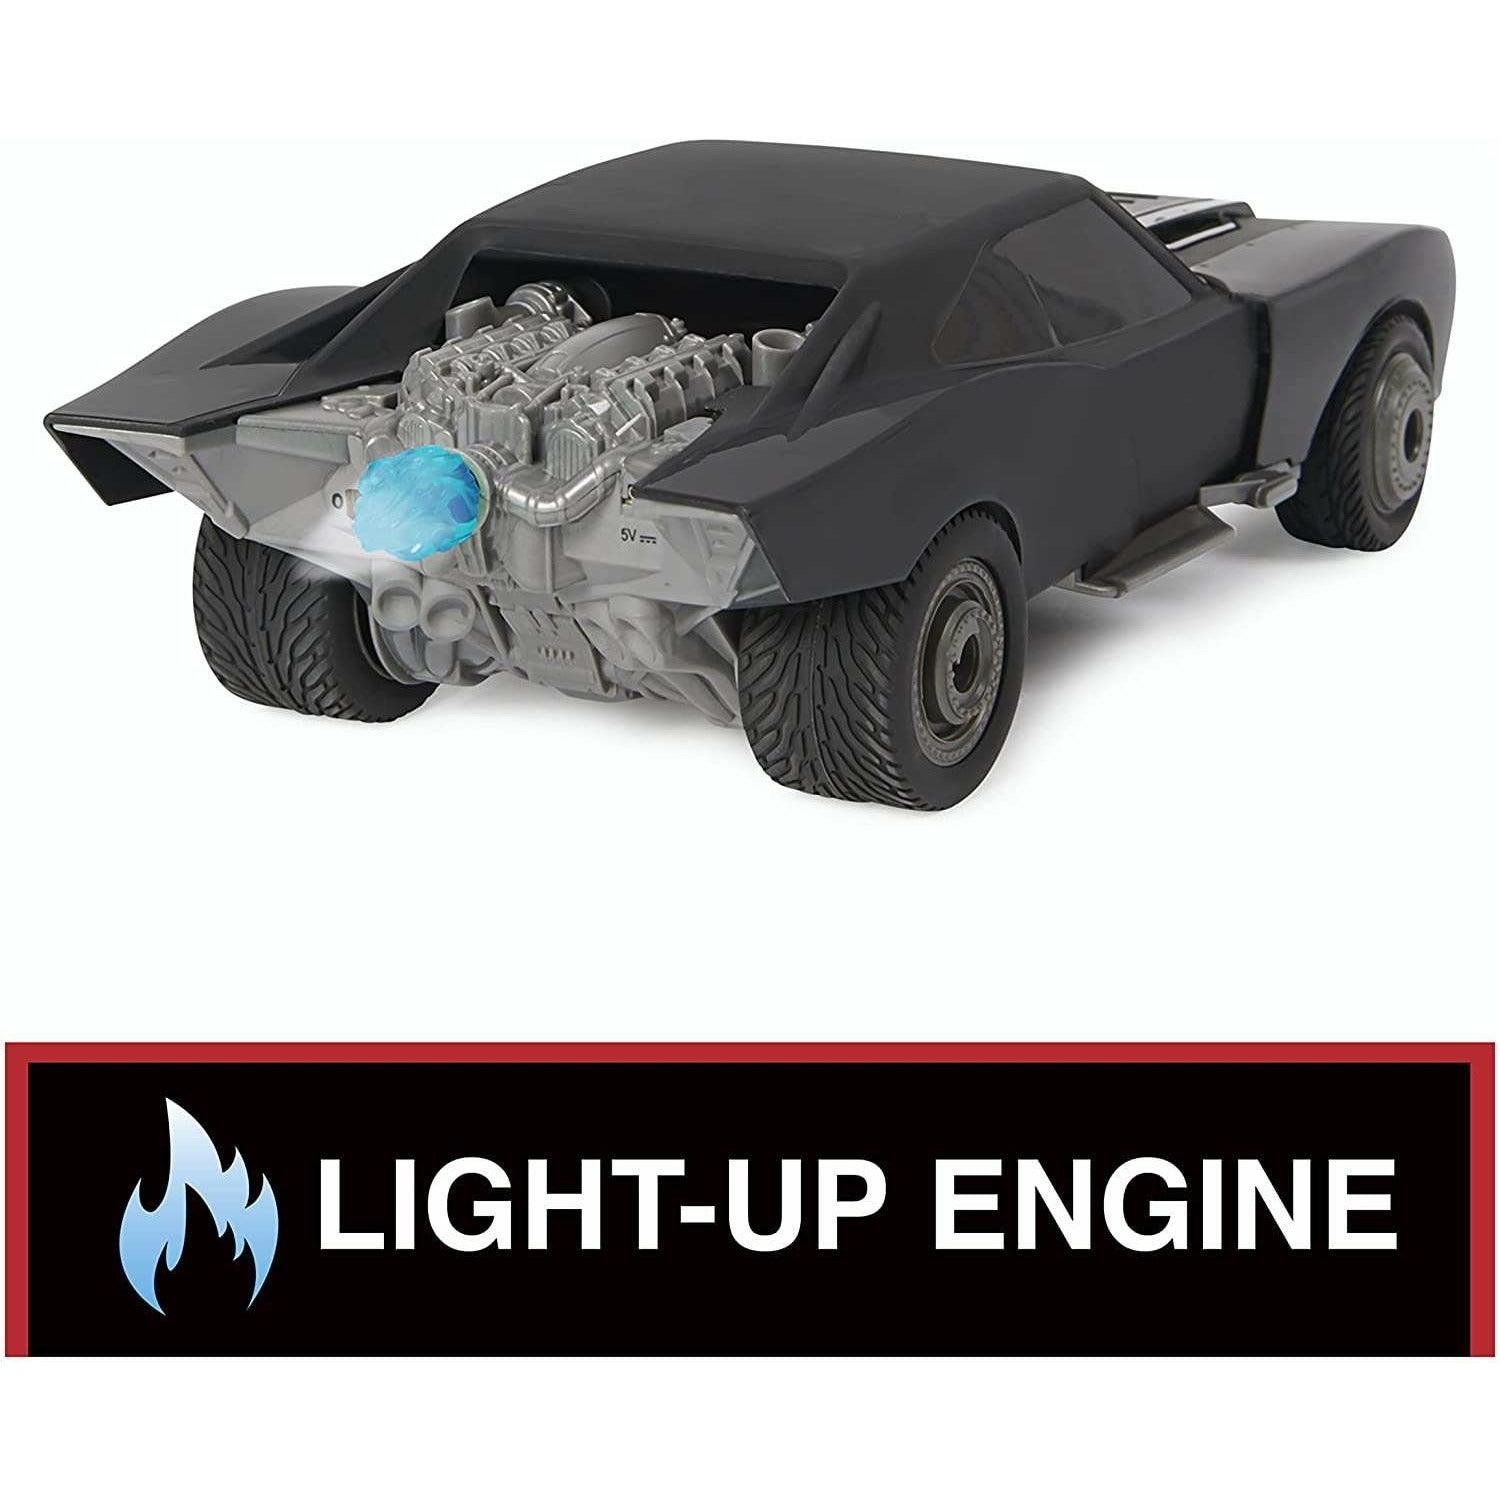 Spin Master Batmobile The Batman Turbo Boost Batmobile With Remote Control and USB 1:15 Scale - BumbleToys - 5-7 Years, Arabic Triangle Trading, Batman, Boys, DC Comics, Remote Control